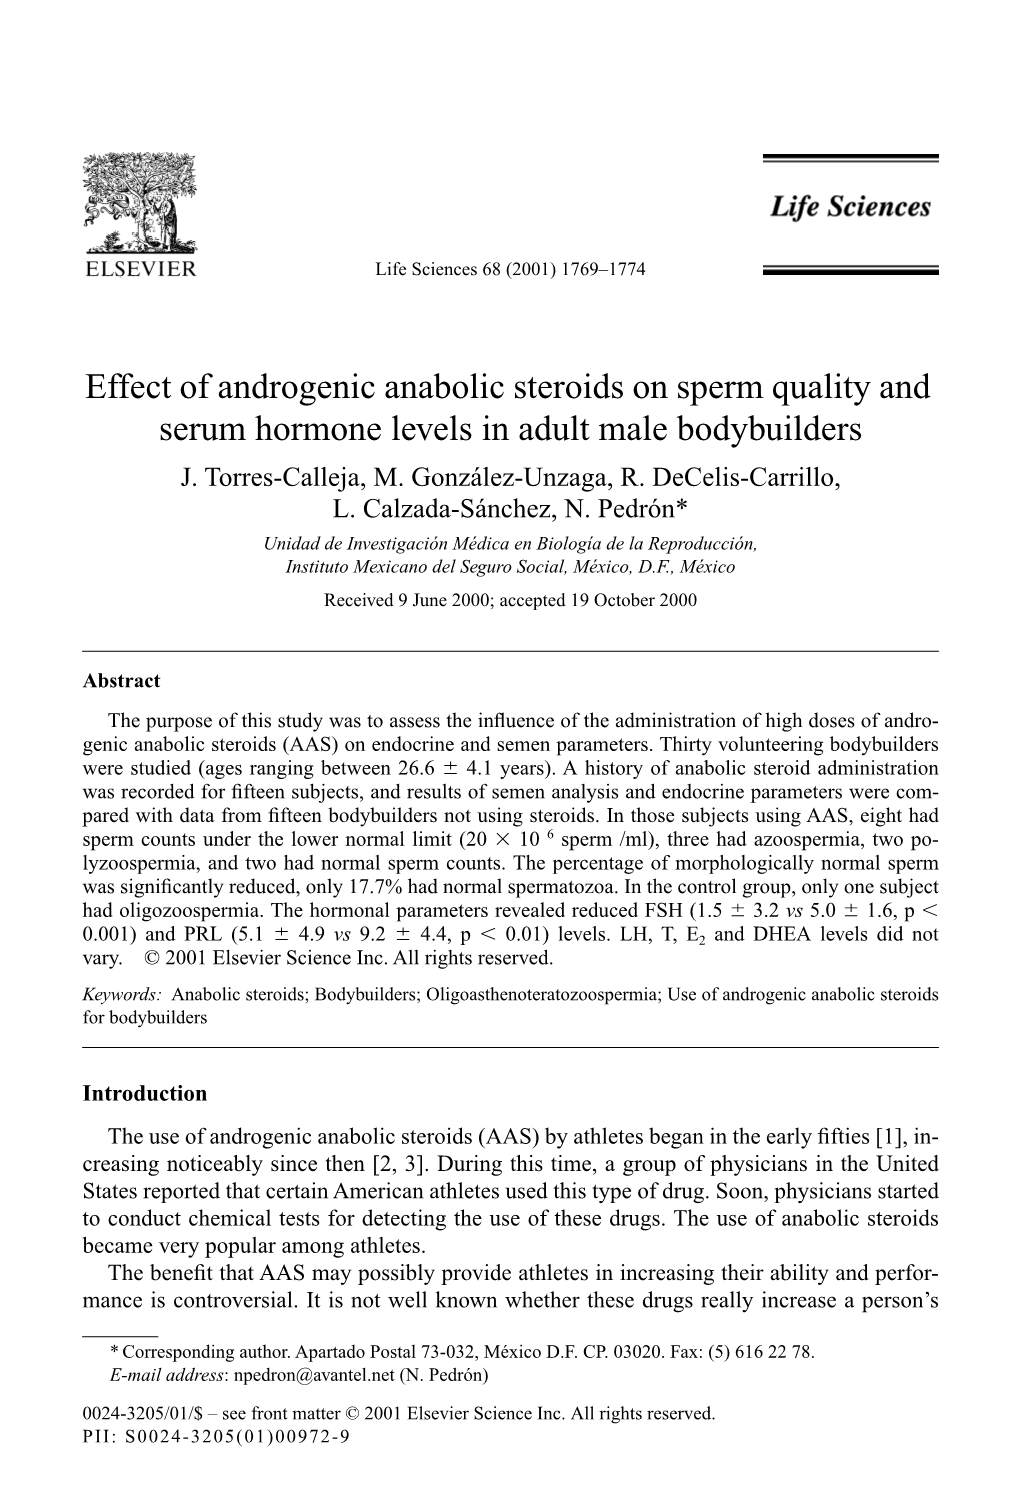 Effect of Androgenic Anabolic Steroids on Sperm Quality and Serum Hormone Levels in Adult Male Bodybuilders J